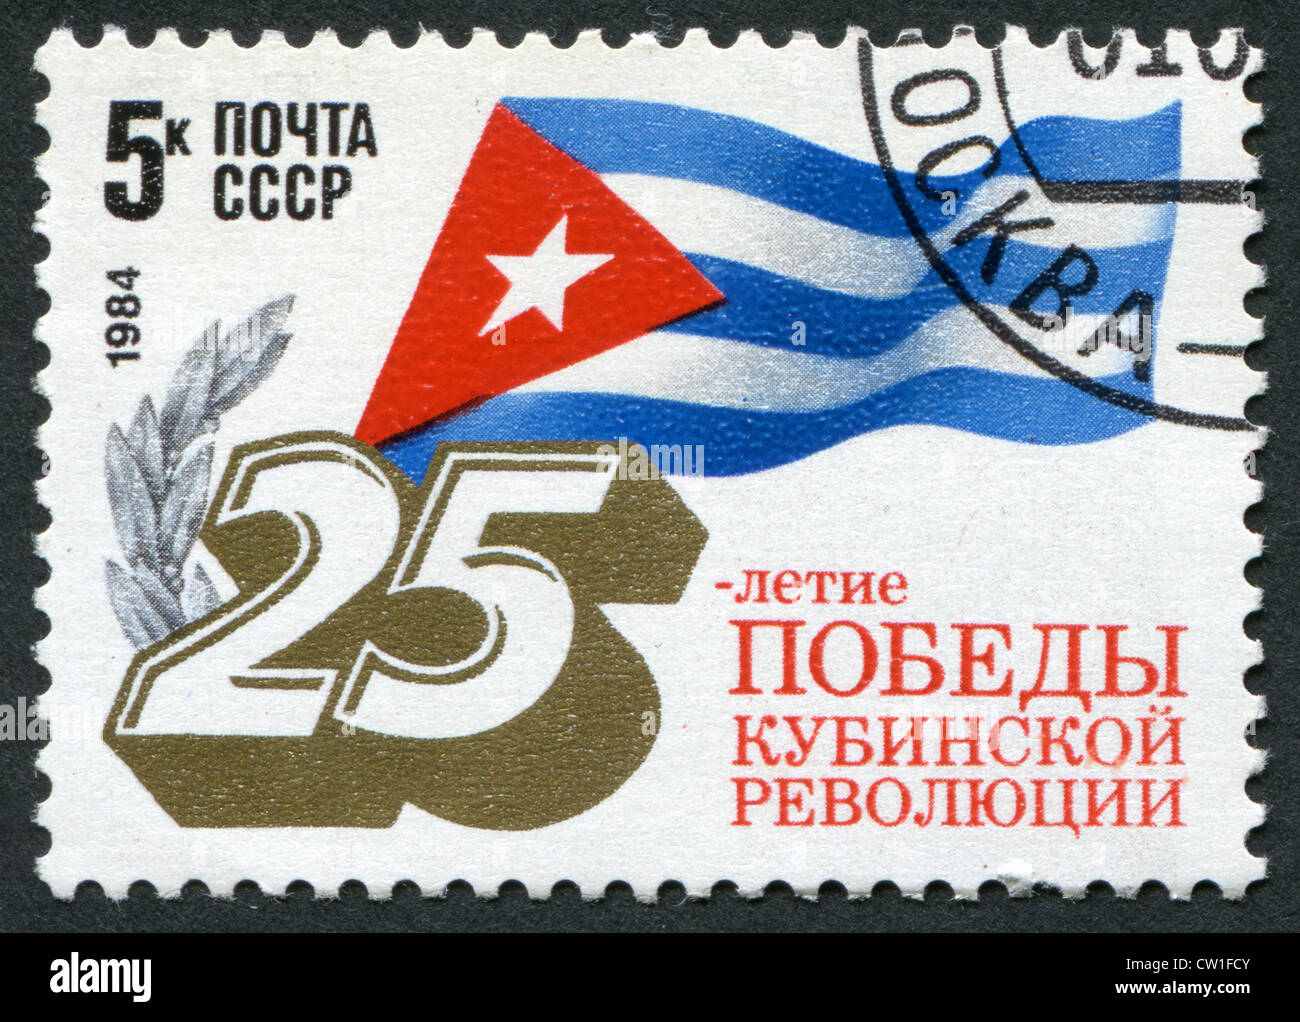 Postage stamps printed in the USSR, dedicated to the 25 th anniversary of the victory of the Cuban revolution Stock Photo